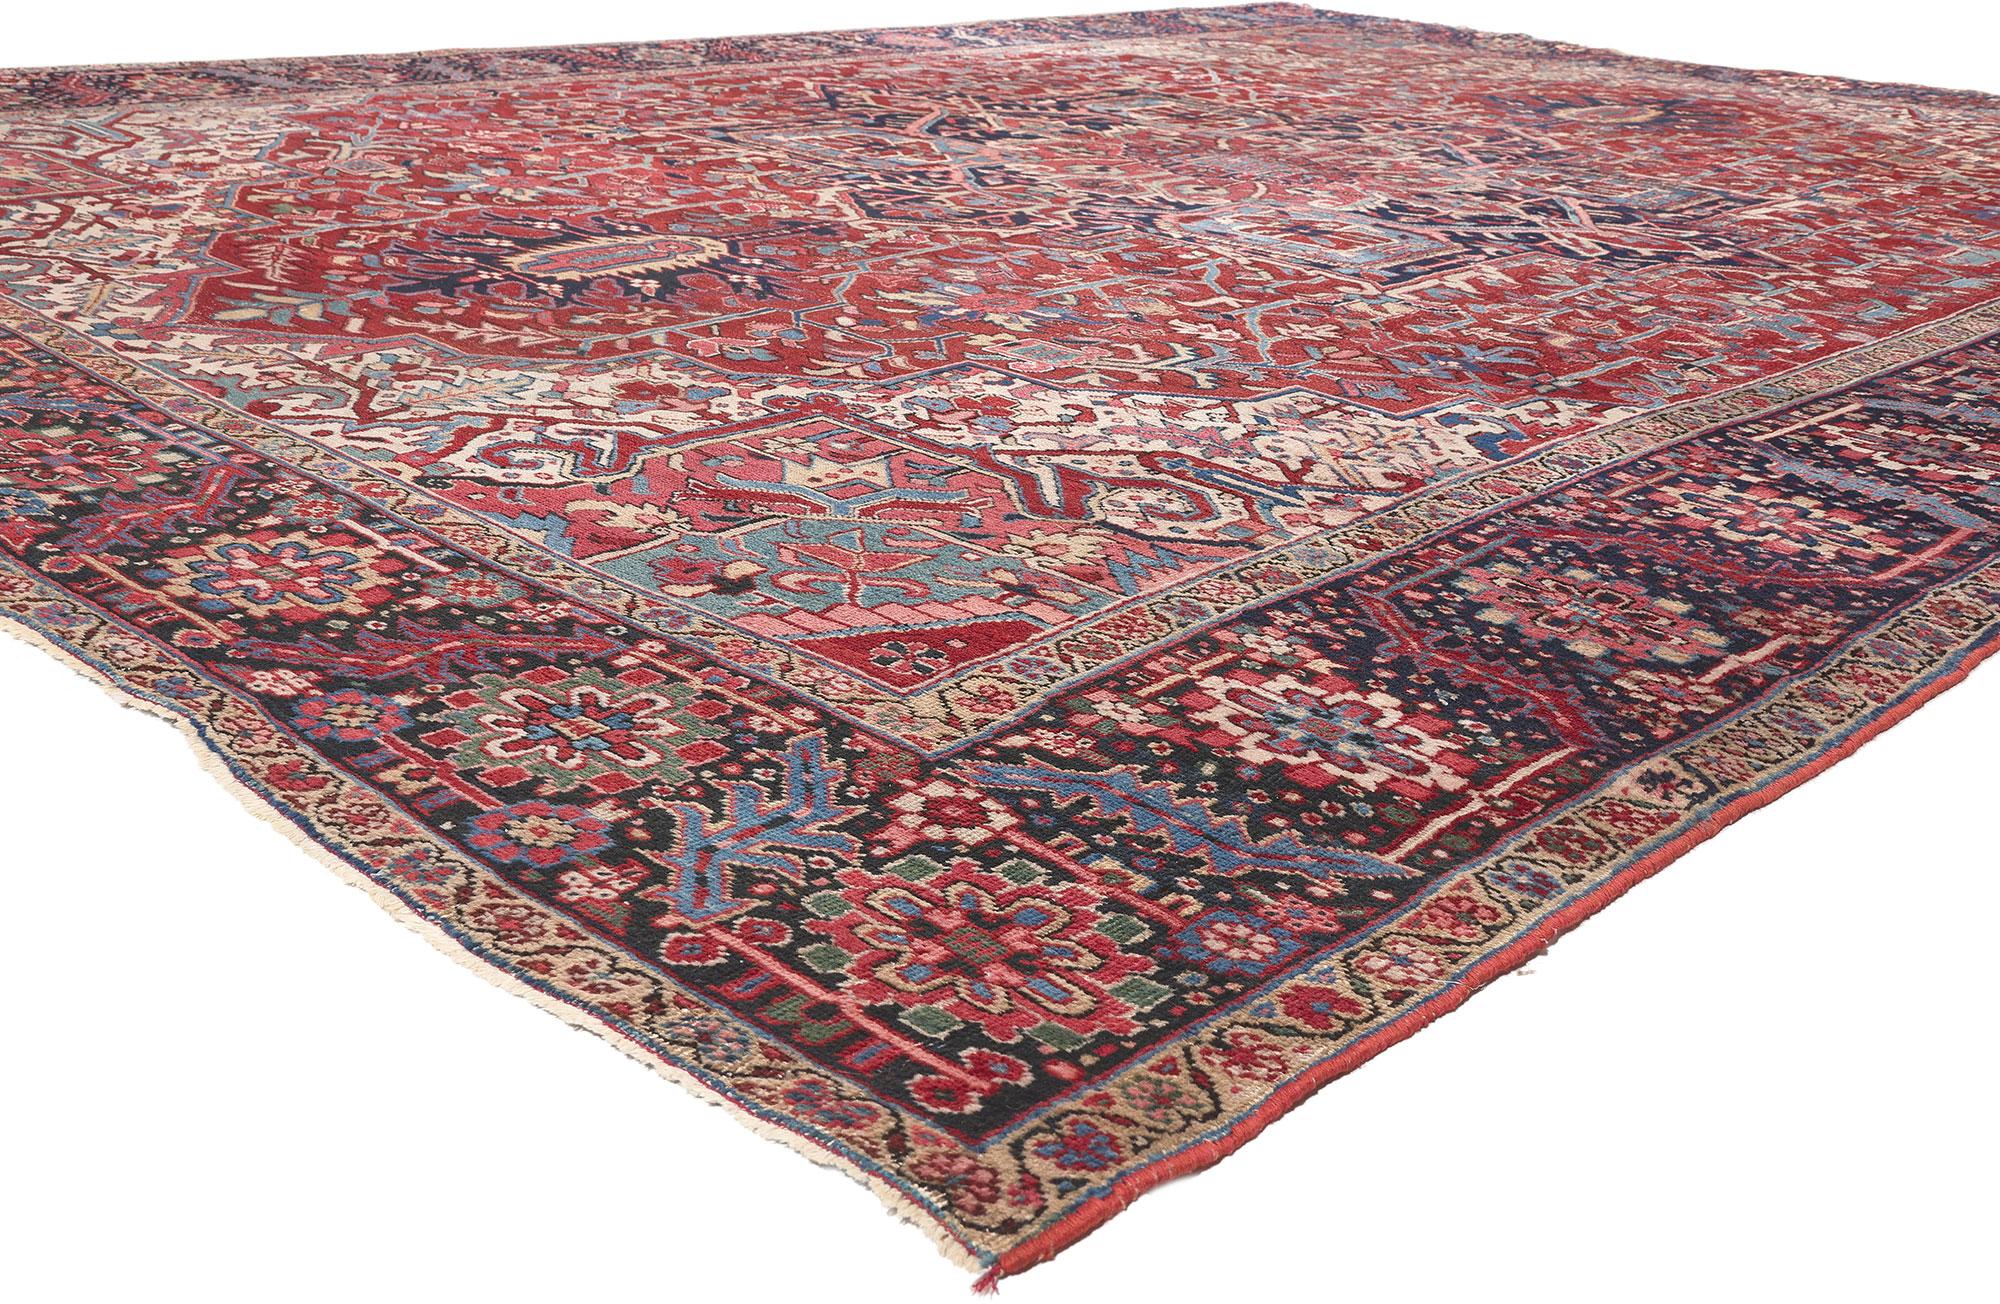 78657 Antique-Worn Persian Heriz Rug, 11'06 x 15'11.
Rustic finesse meets patriotic flair in this hand knotted wool antique-worn Persian Heriz rug. The beguiling botanical design and traditional color palette woven into this piece work together